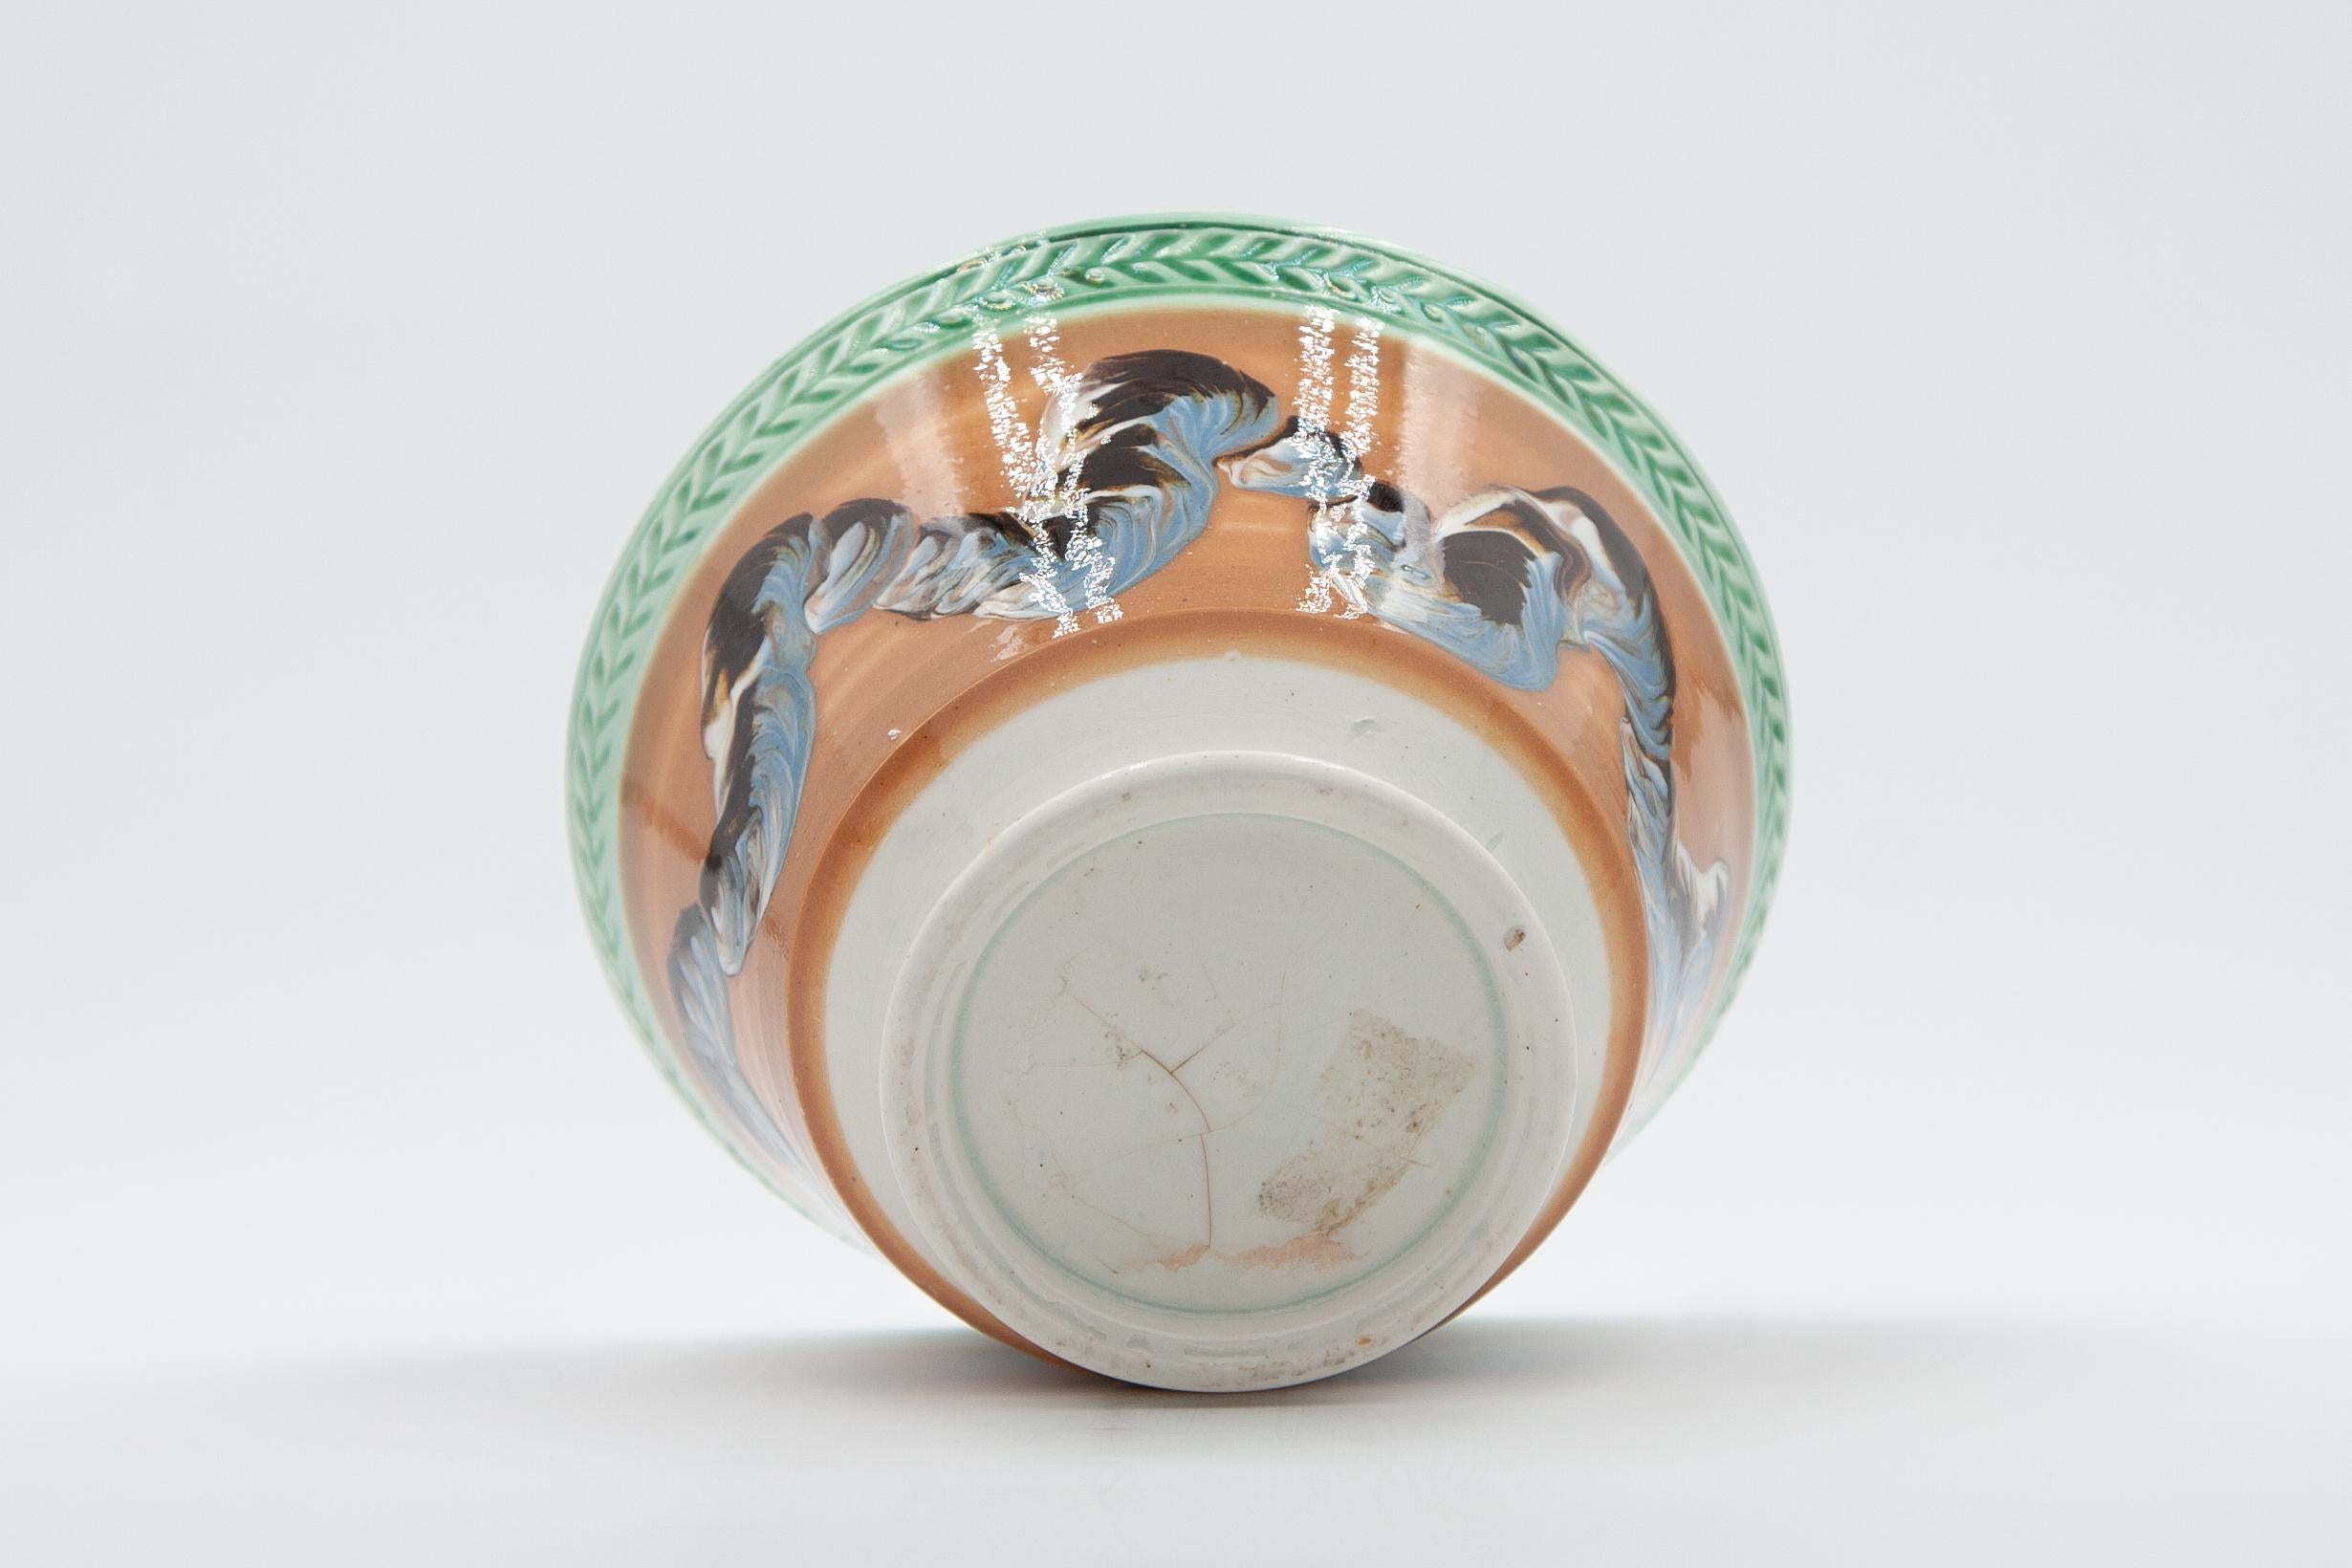 An English mochaware waste bowl in the London shape with cable or “earthworm” decoration, dating to circa 1820.

Developed in Staffordshire in the late 18th century, dipped wares utilized colored liquid clay slips to create surprisingly modern